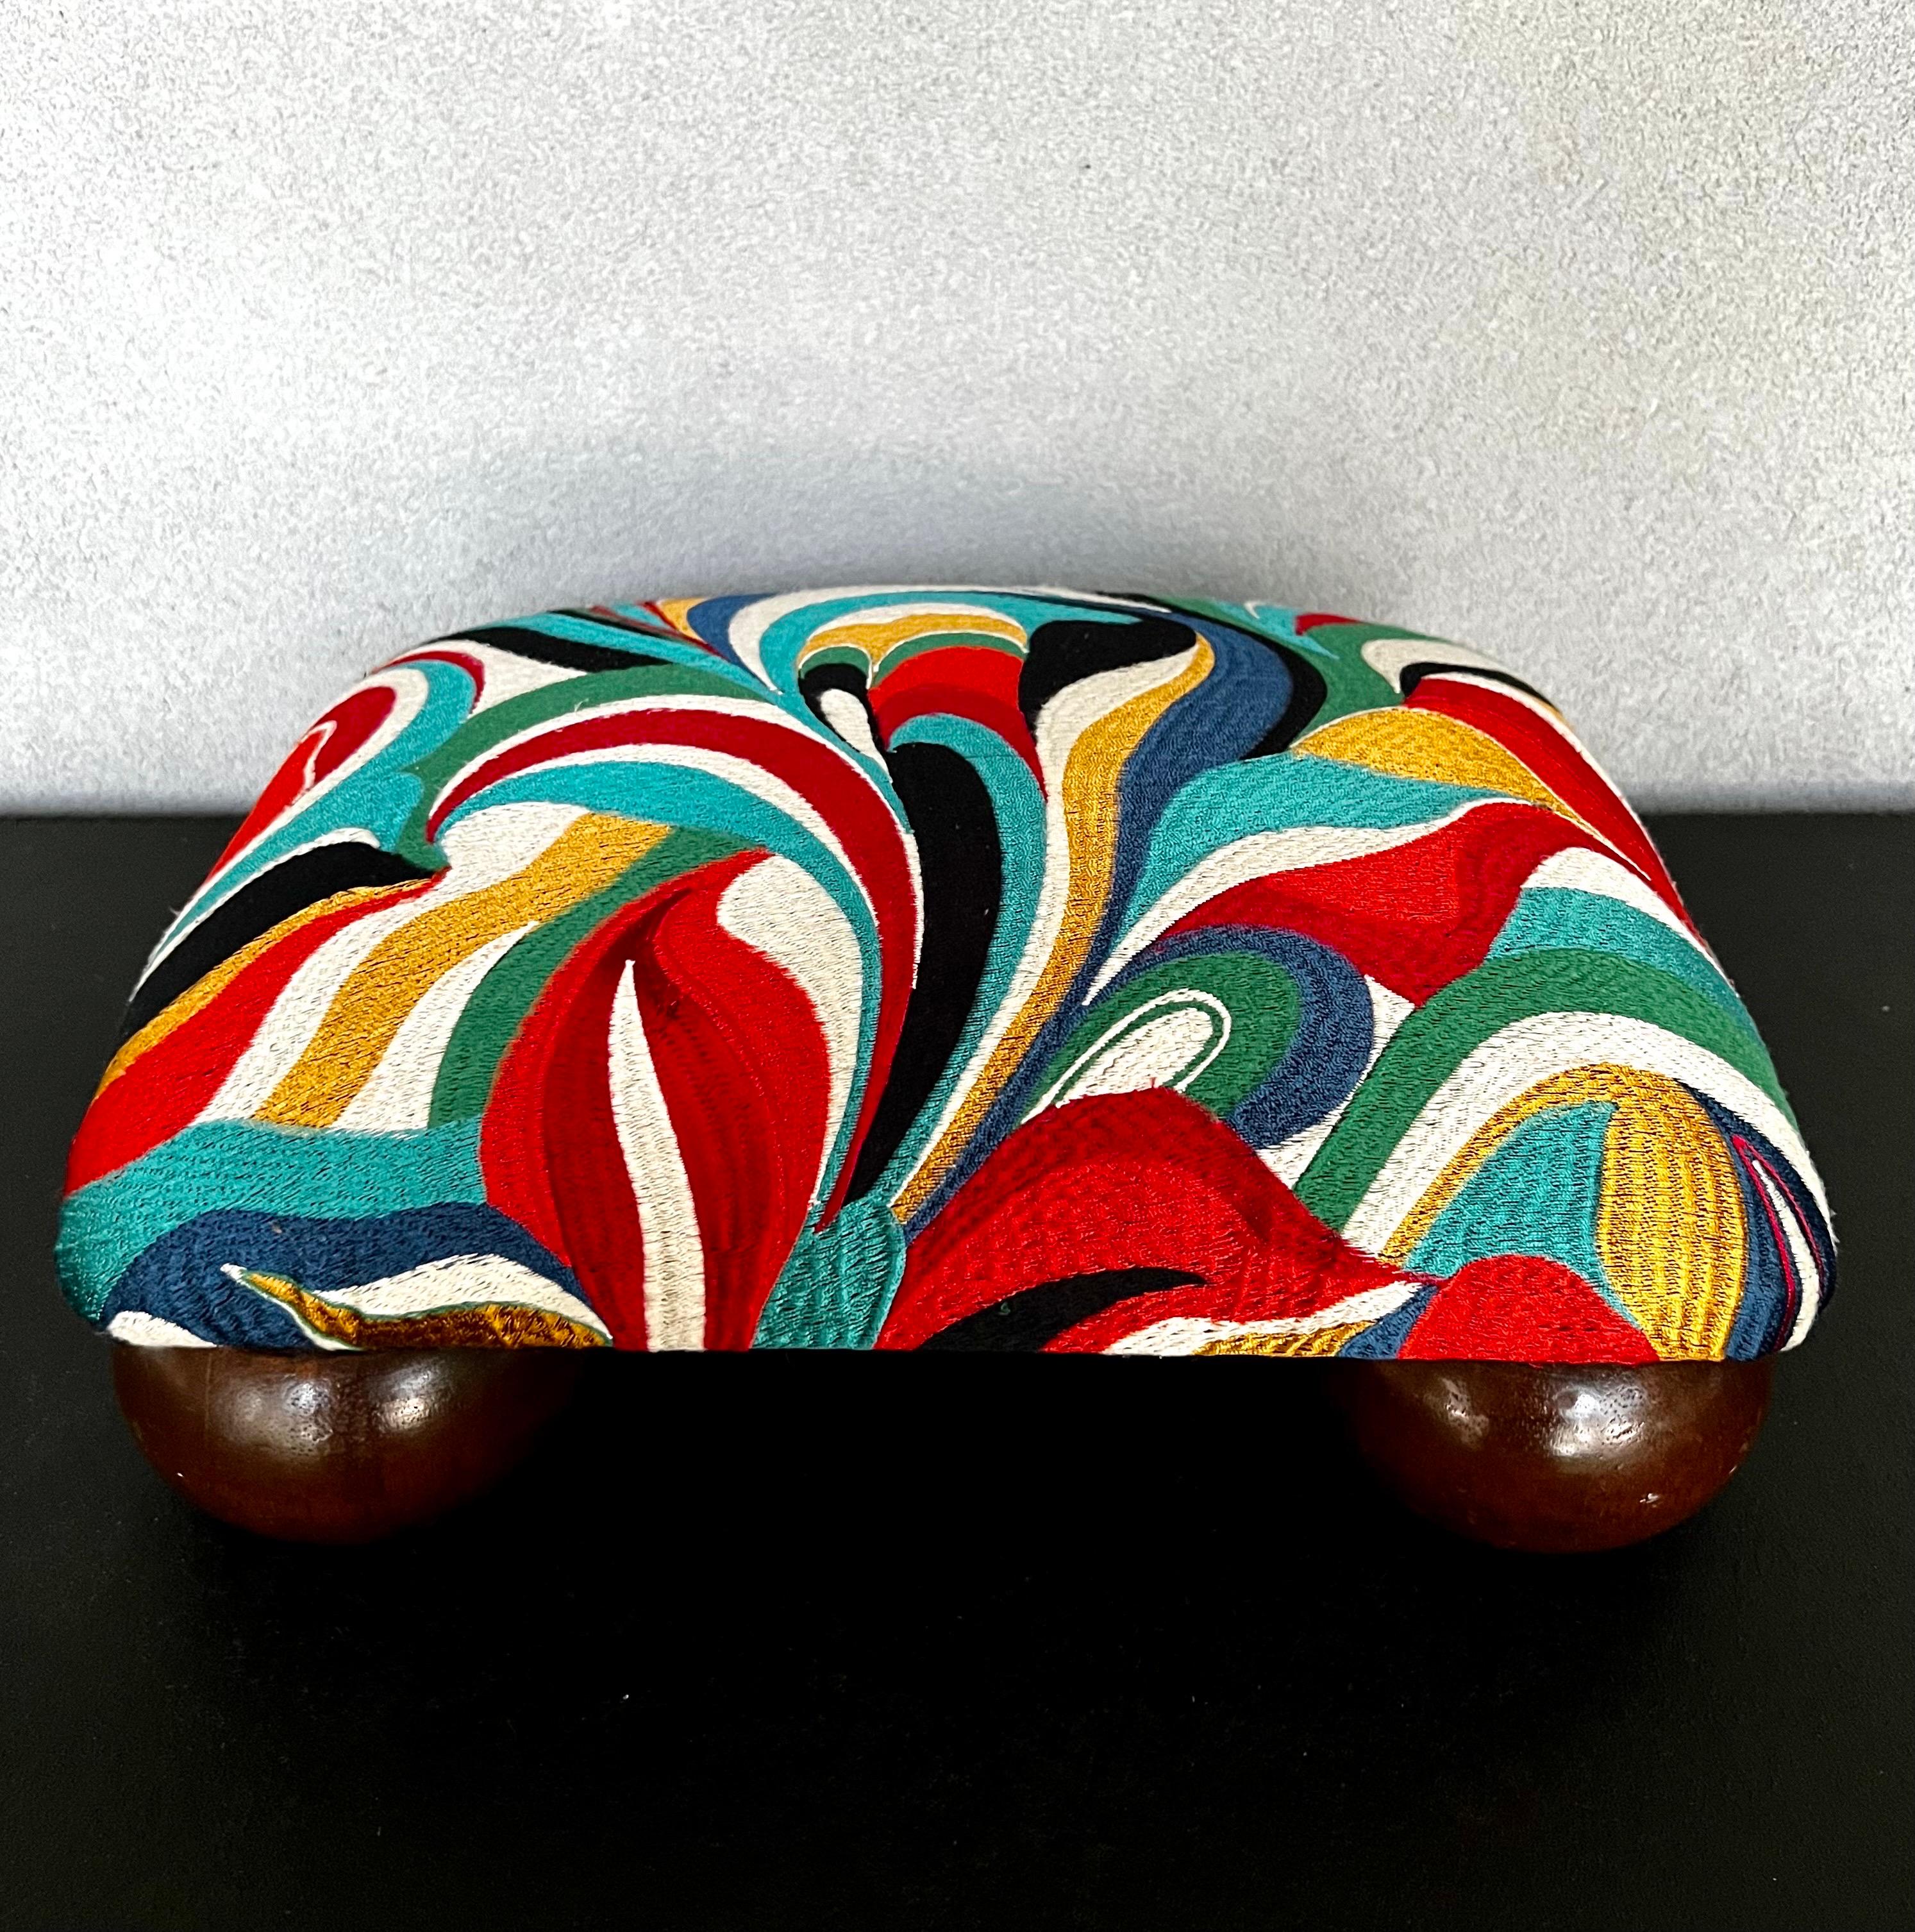 Stunning small Mid-Century Modern footstool that has been fully refinished including new foam and padding, this vibrant multicolor abstract embroidered fabric is the pop of color needed in any room 
This small footstool would be the perfect addition